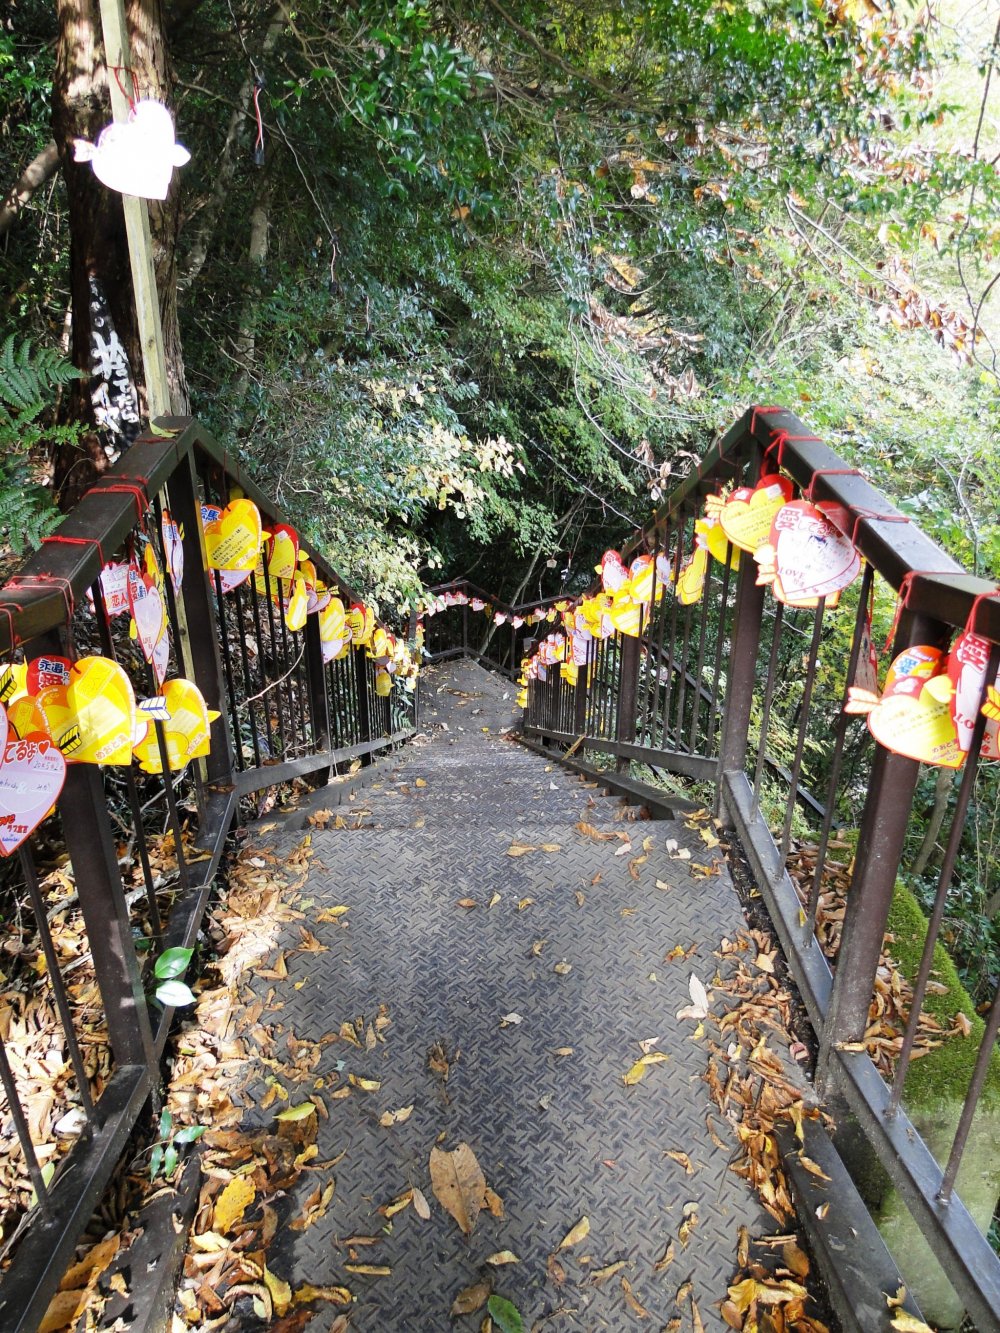 The steps down to the falls are lined with paper hearts in homage to the legend of the falls